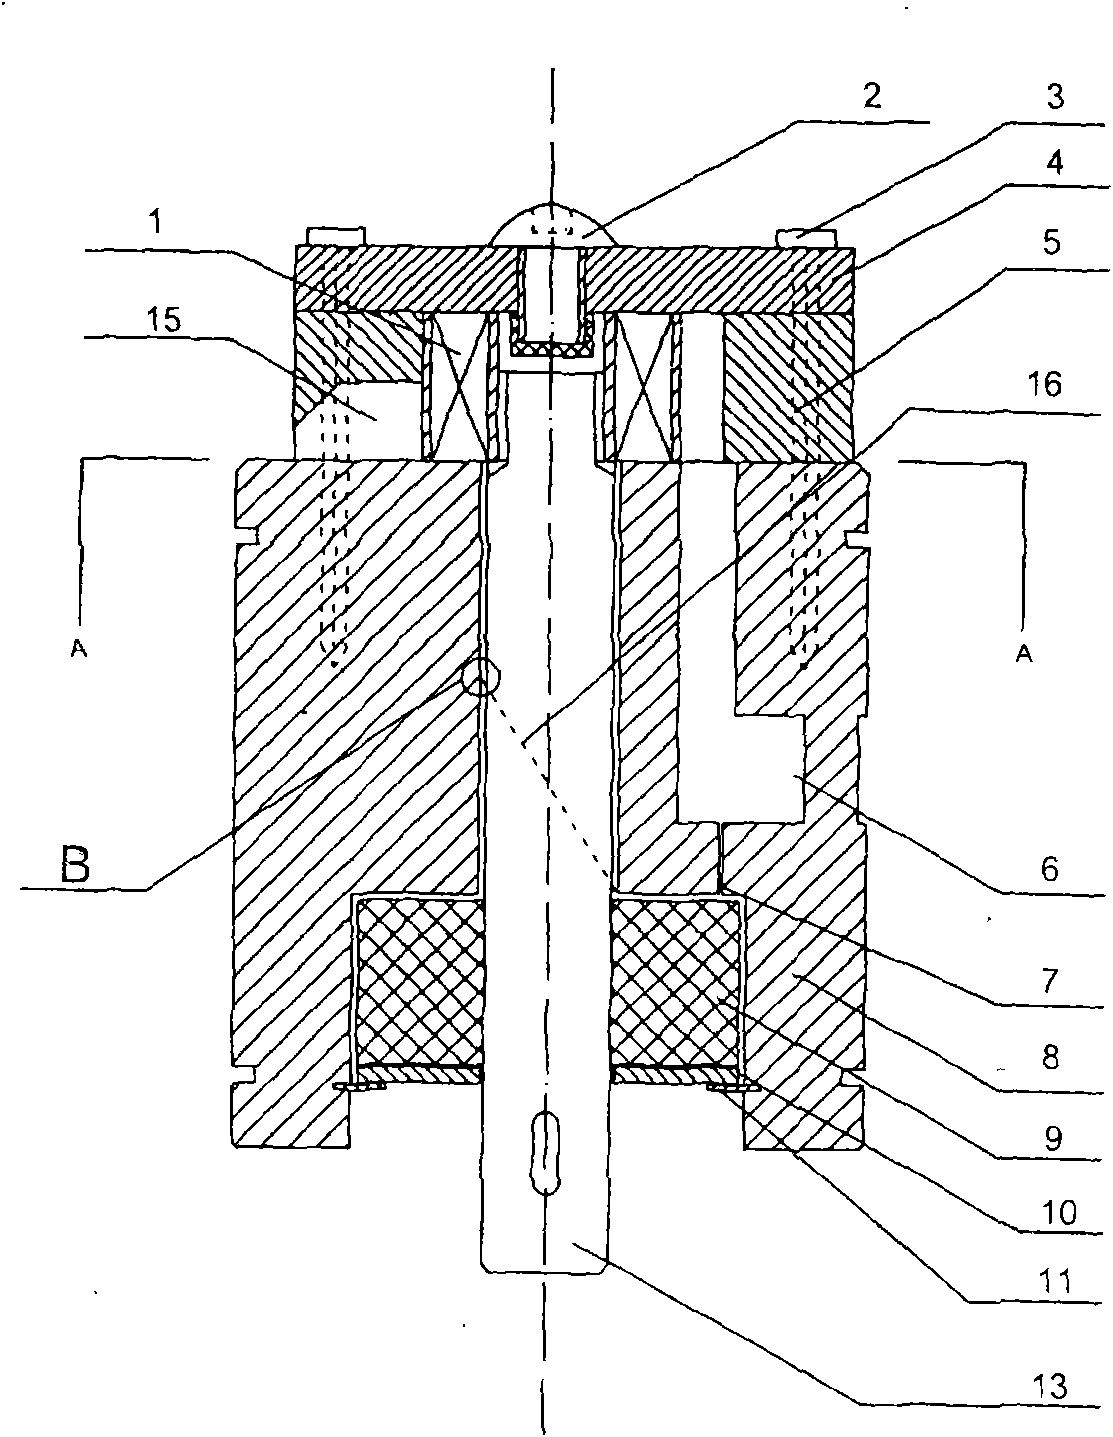 Single-stage blade pump for dimethyl ether vehicle